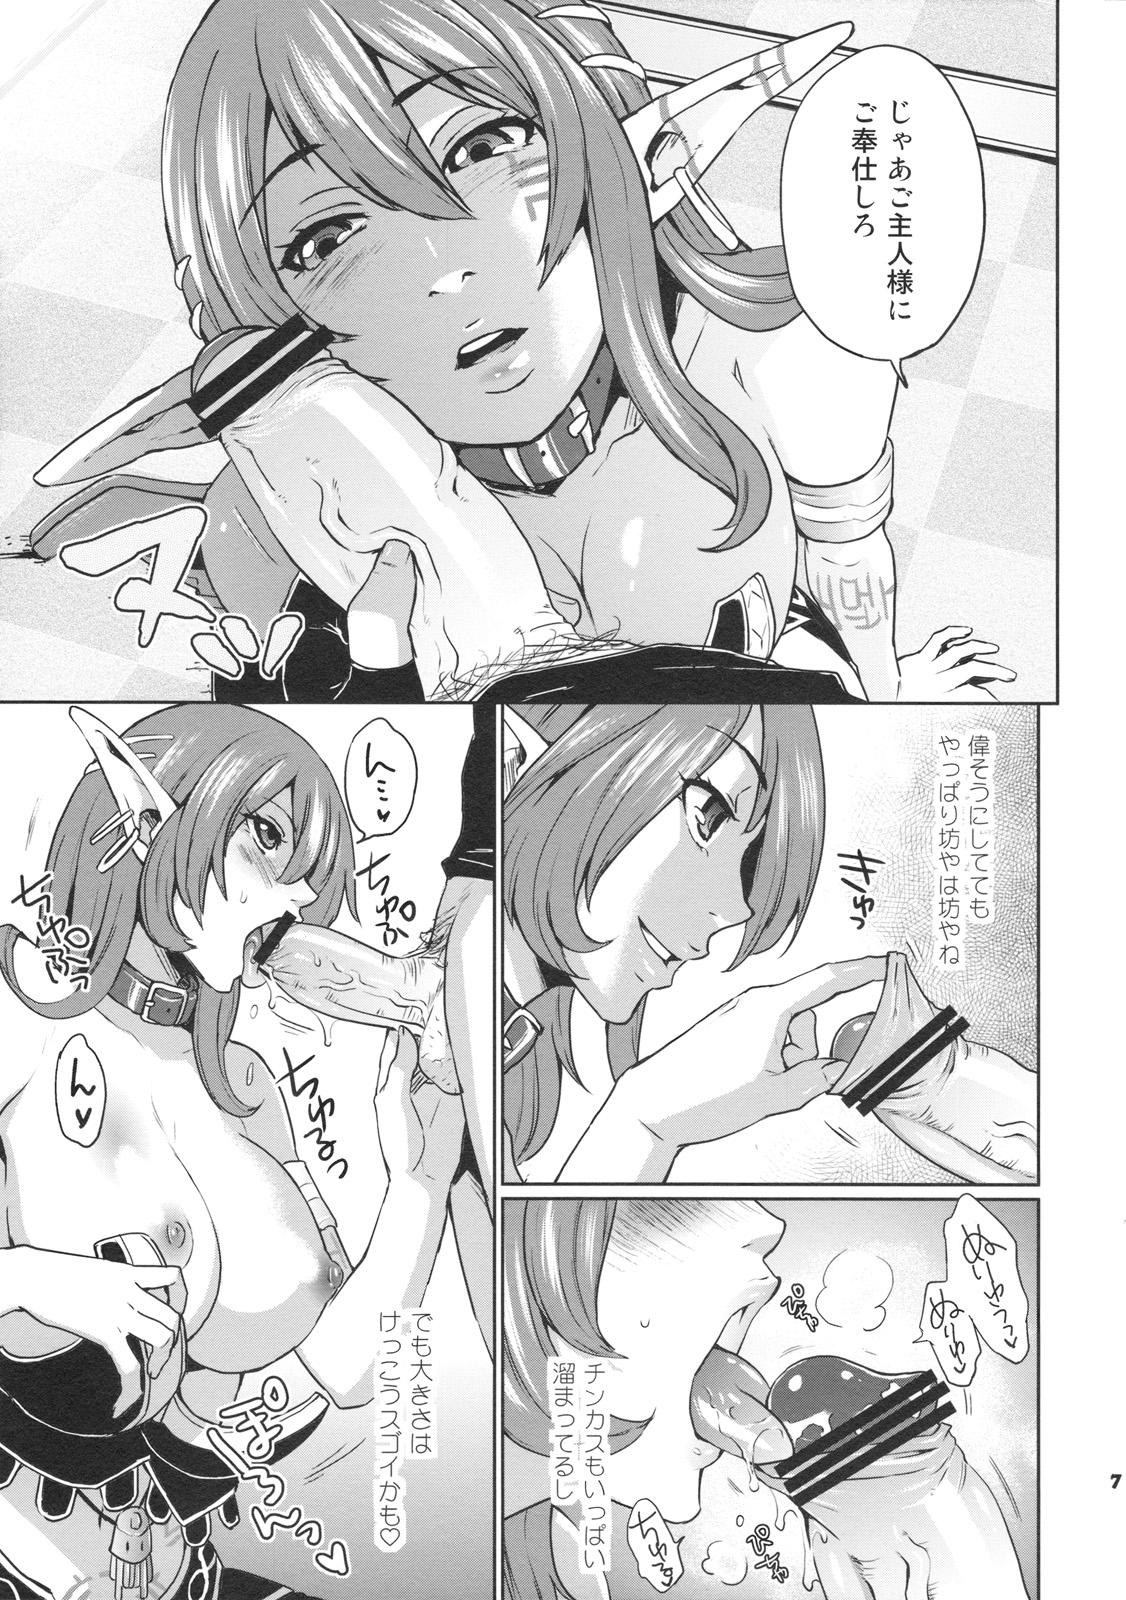 Family Hoshi no Umi no Miboujin - The Widow of The Star Ocean - Star ocean 4 Hot Pussy - Page 7